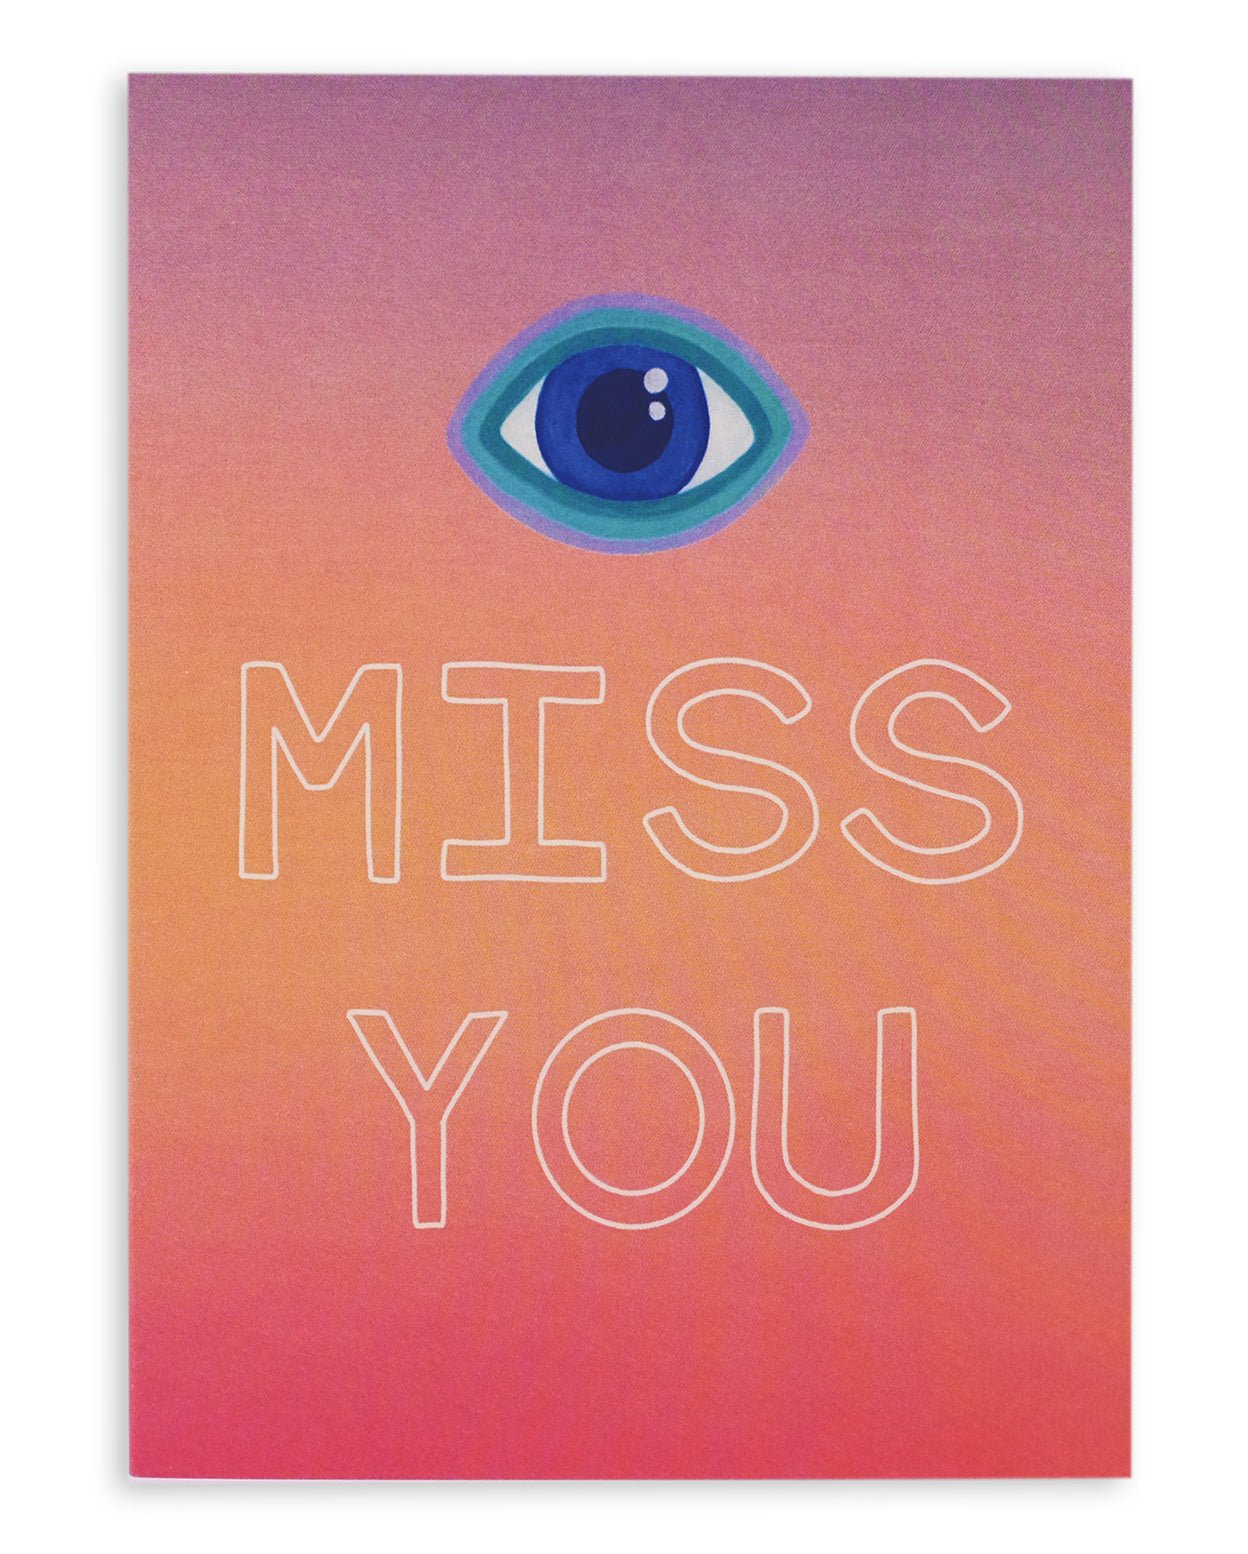 Greeting card with the symbol of an eye followed by the words &quot;Miss You&quot; in white hollow font on a gradient purple, orange and red cardstock. Shown against a white background.